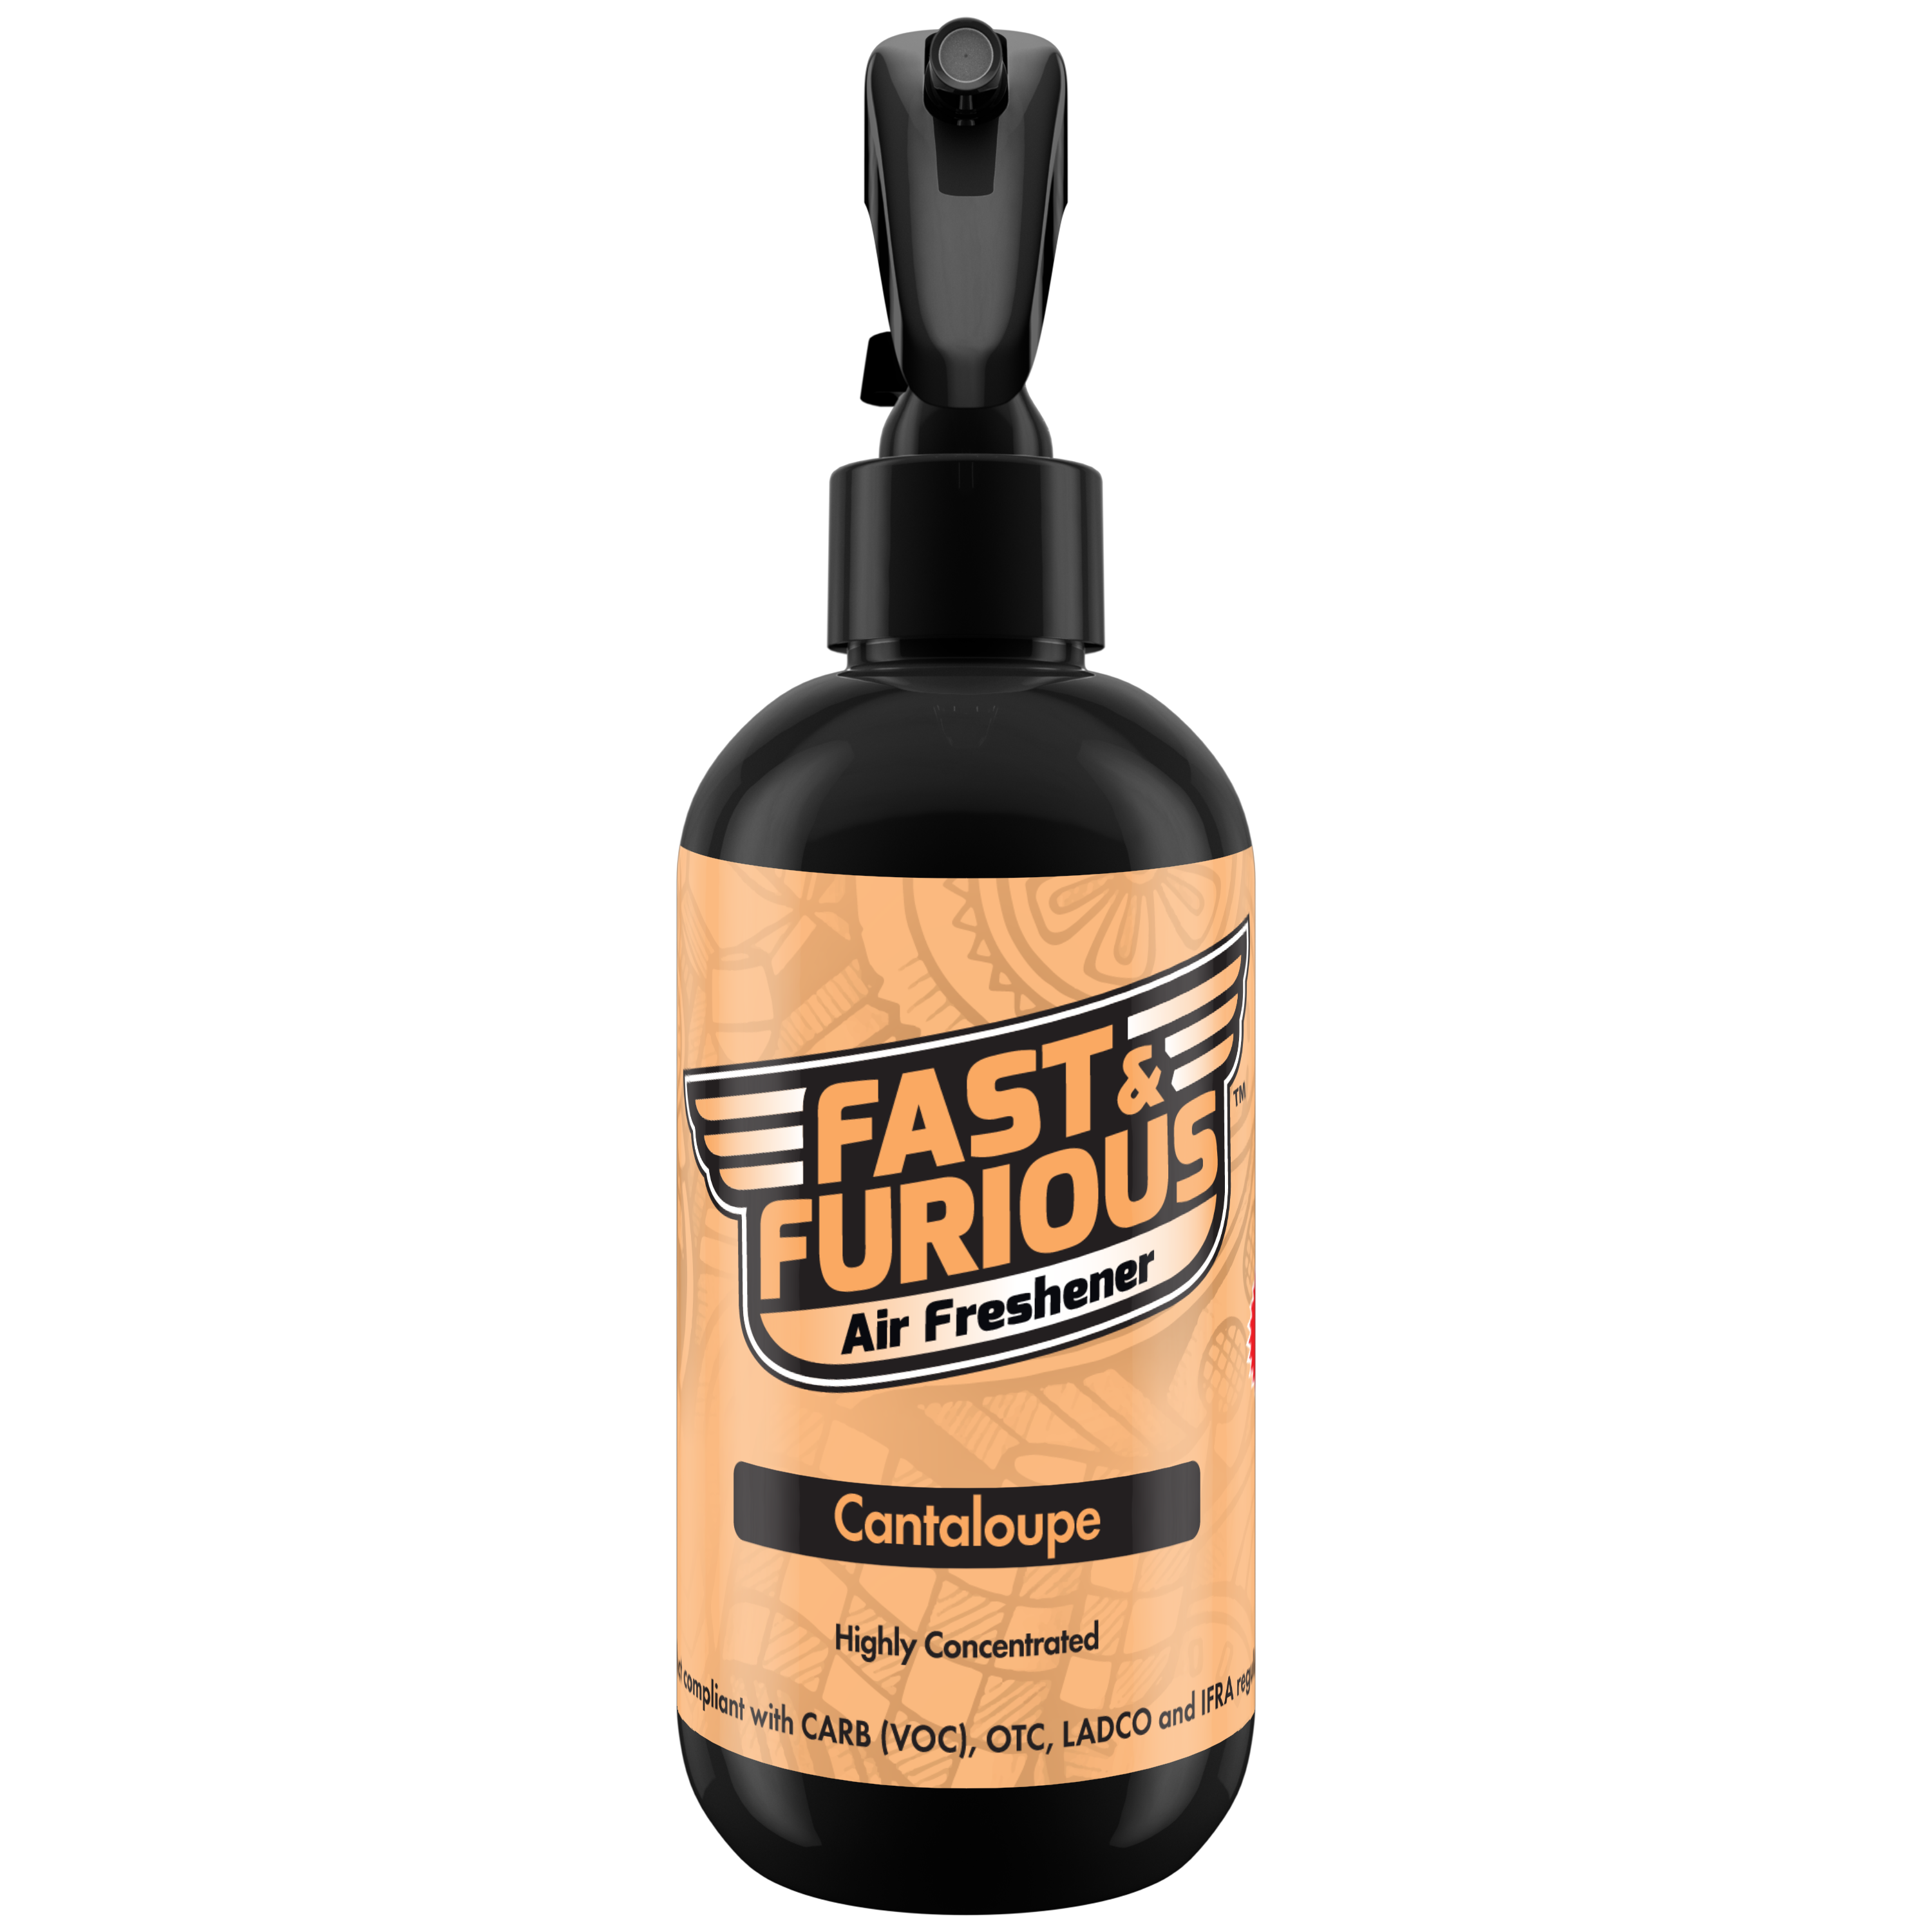 Fast and Furious Air Freshener - Cantaloupe Scent Size: 8oz